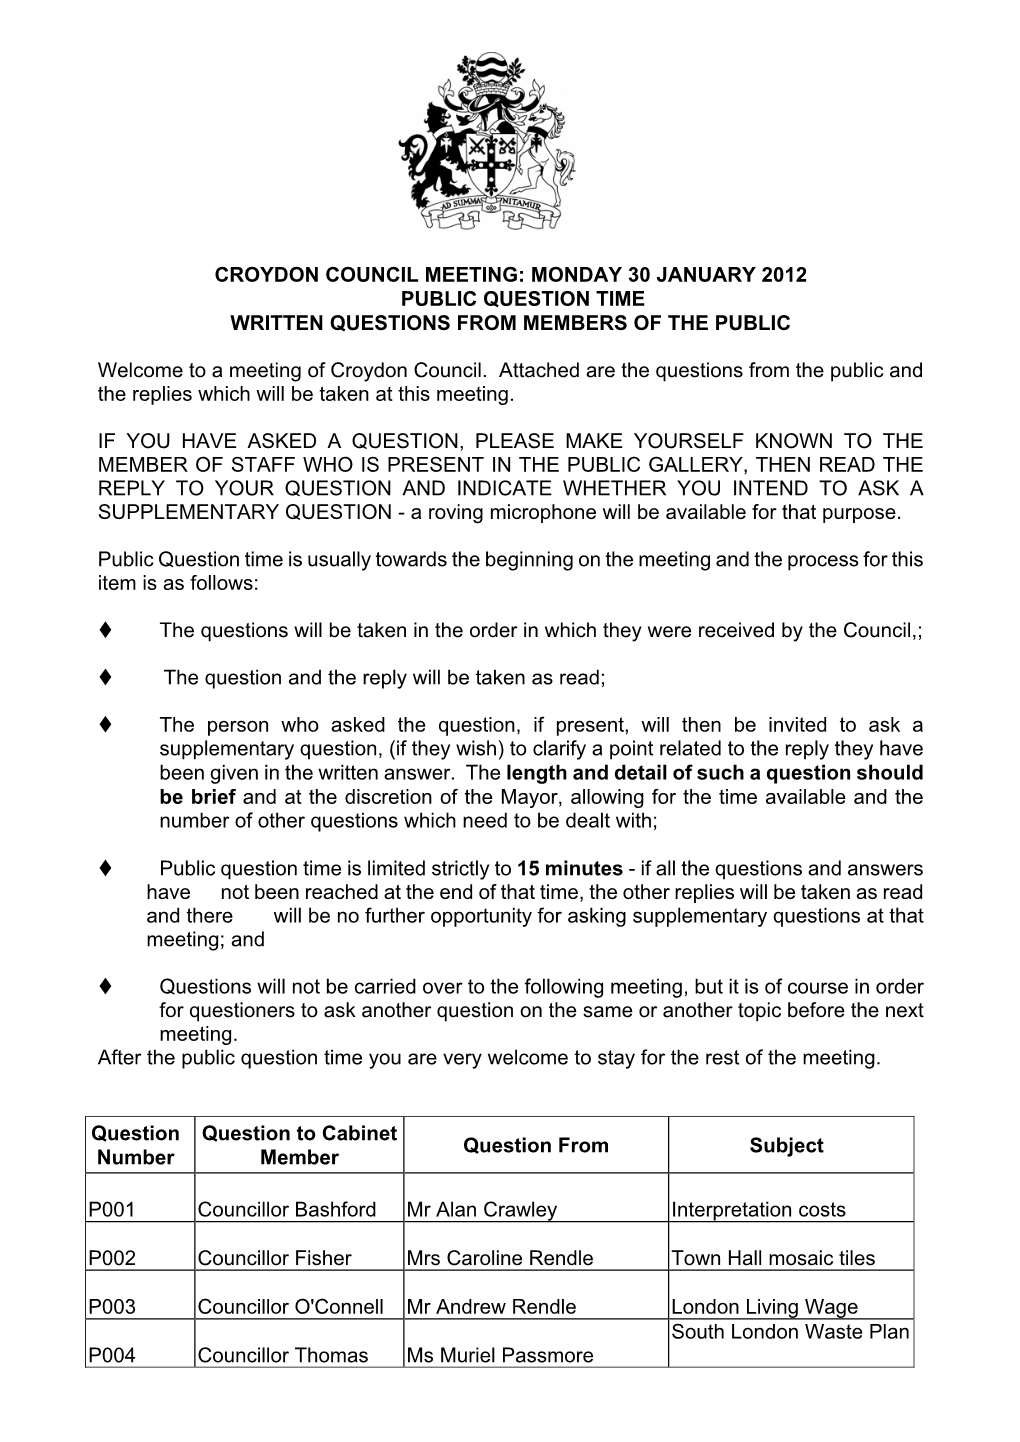 Croydon Council Meeting: Monday 30 January 2012 Public Question Time Written Questions from Members of the Public